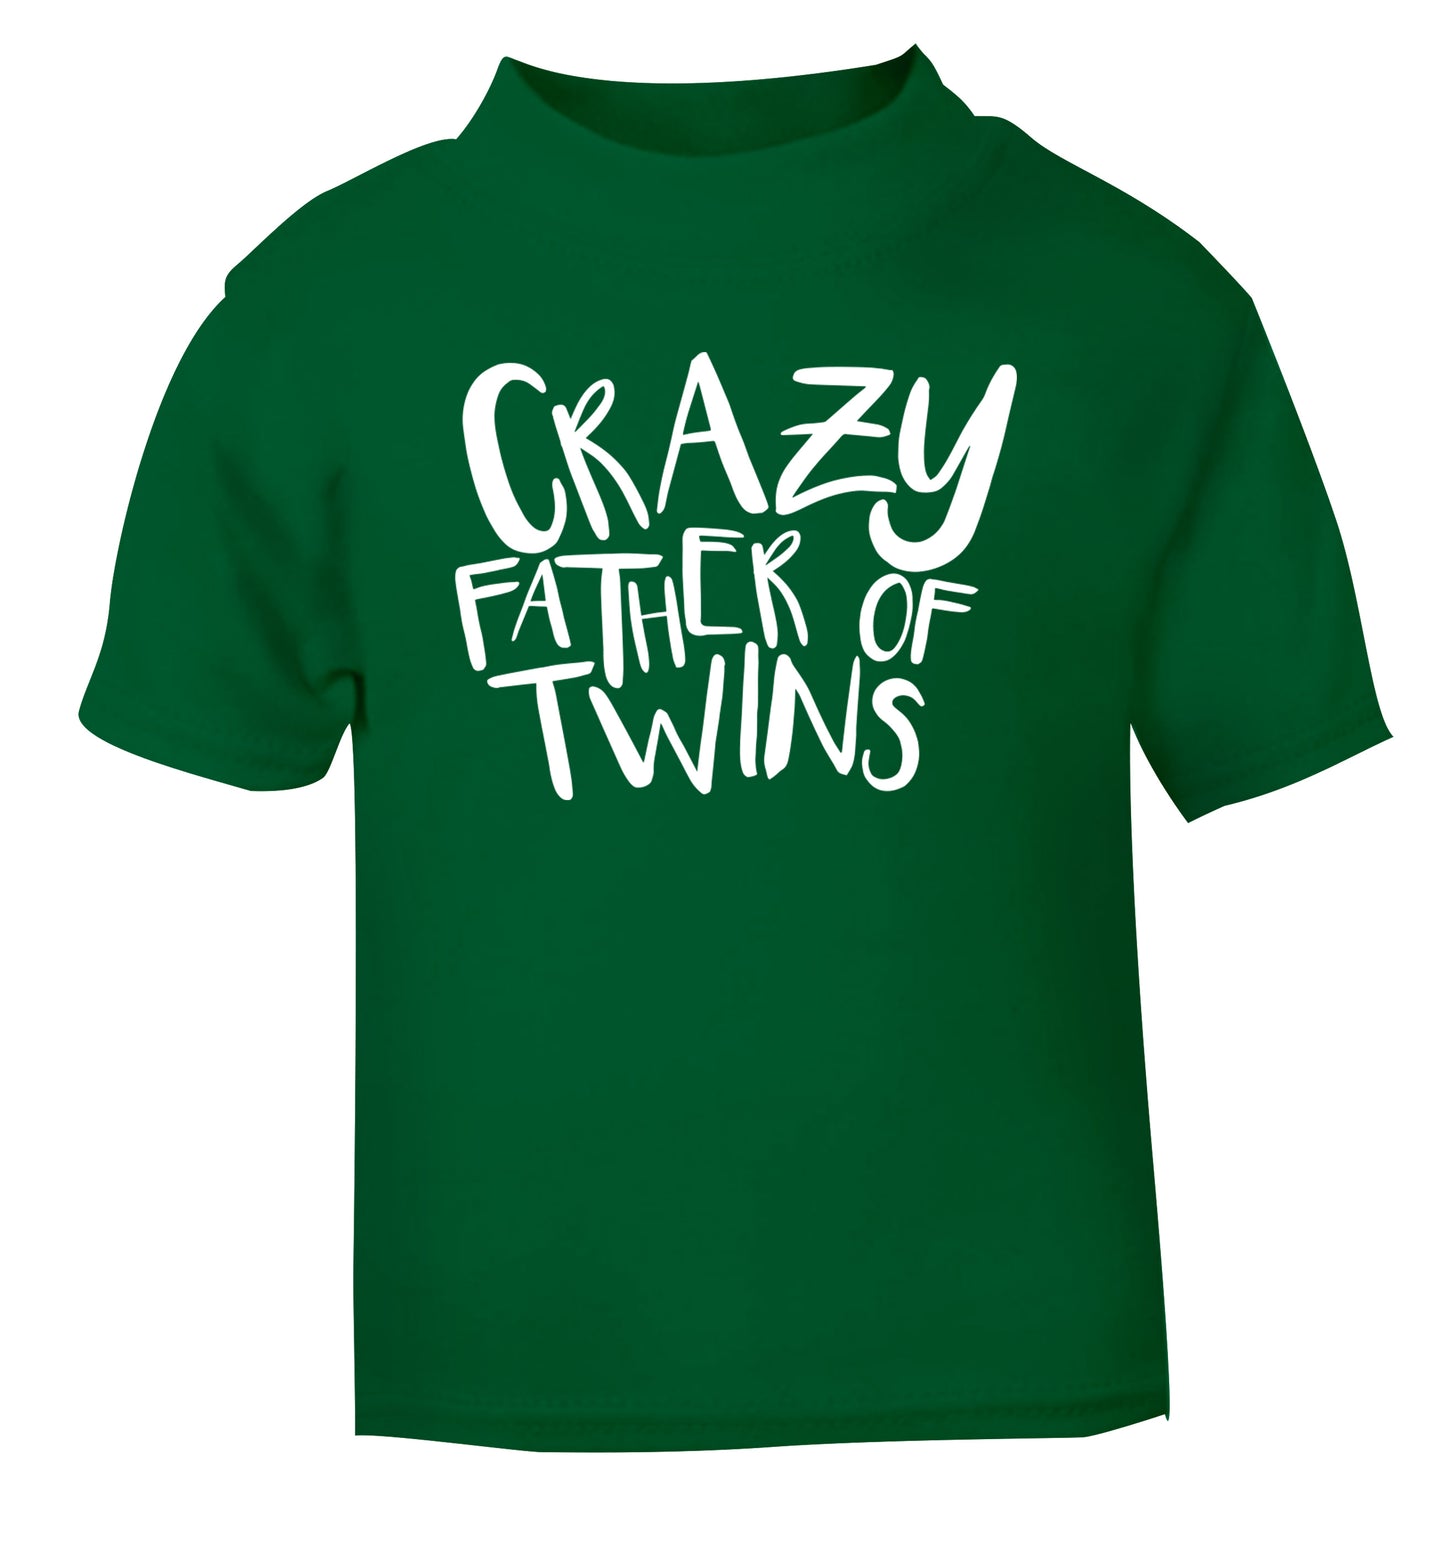 Crazy father of twins green Baby Toddler Tshirt 2 Years